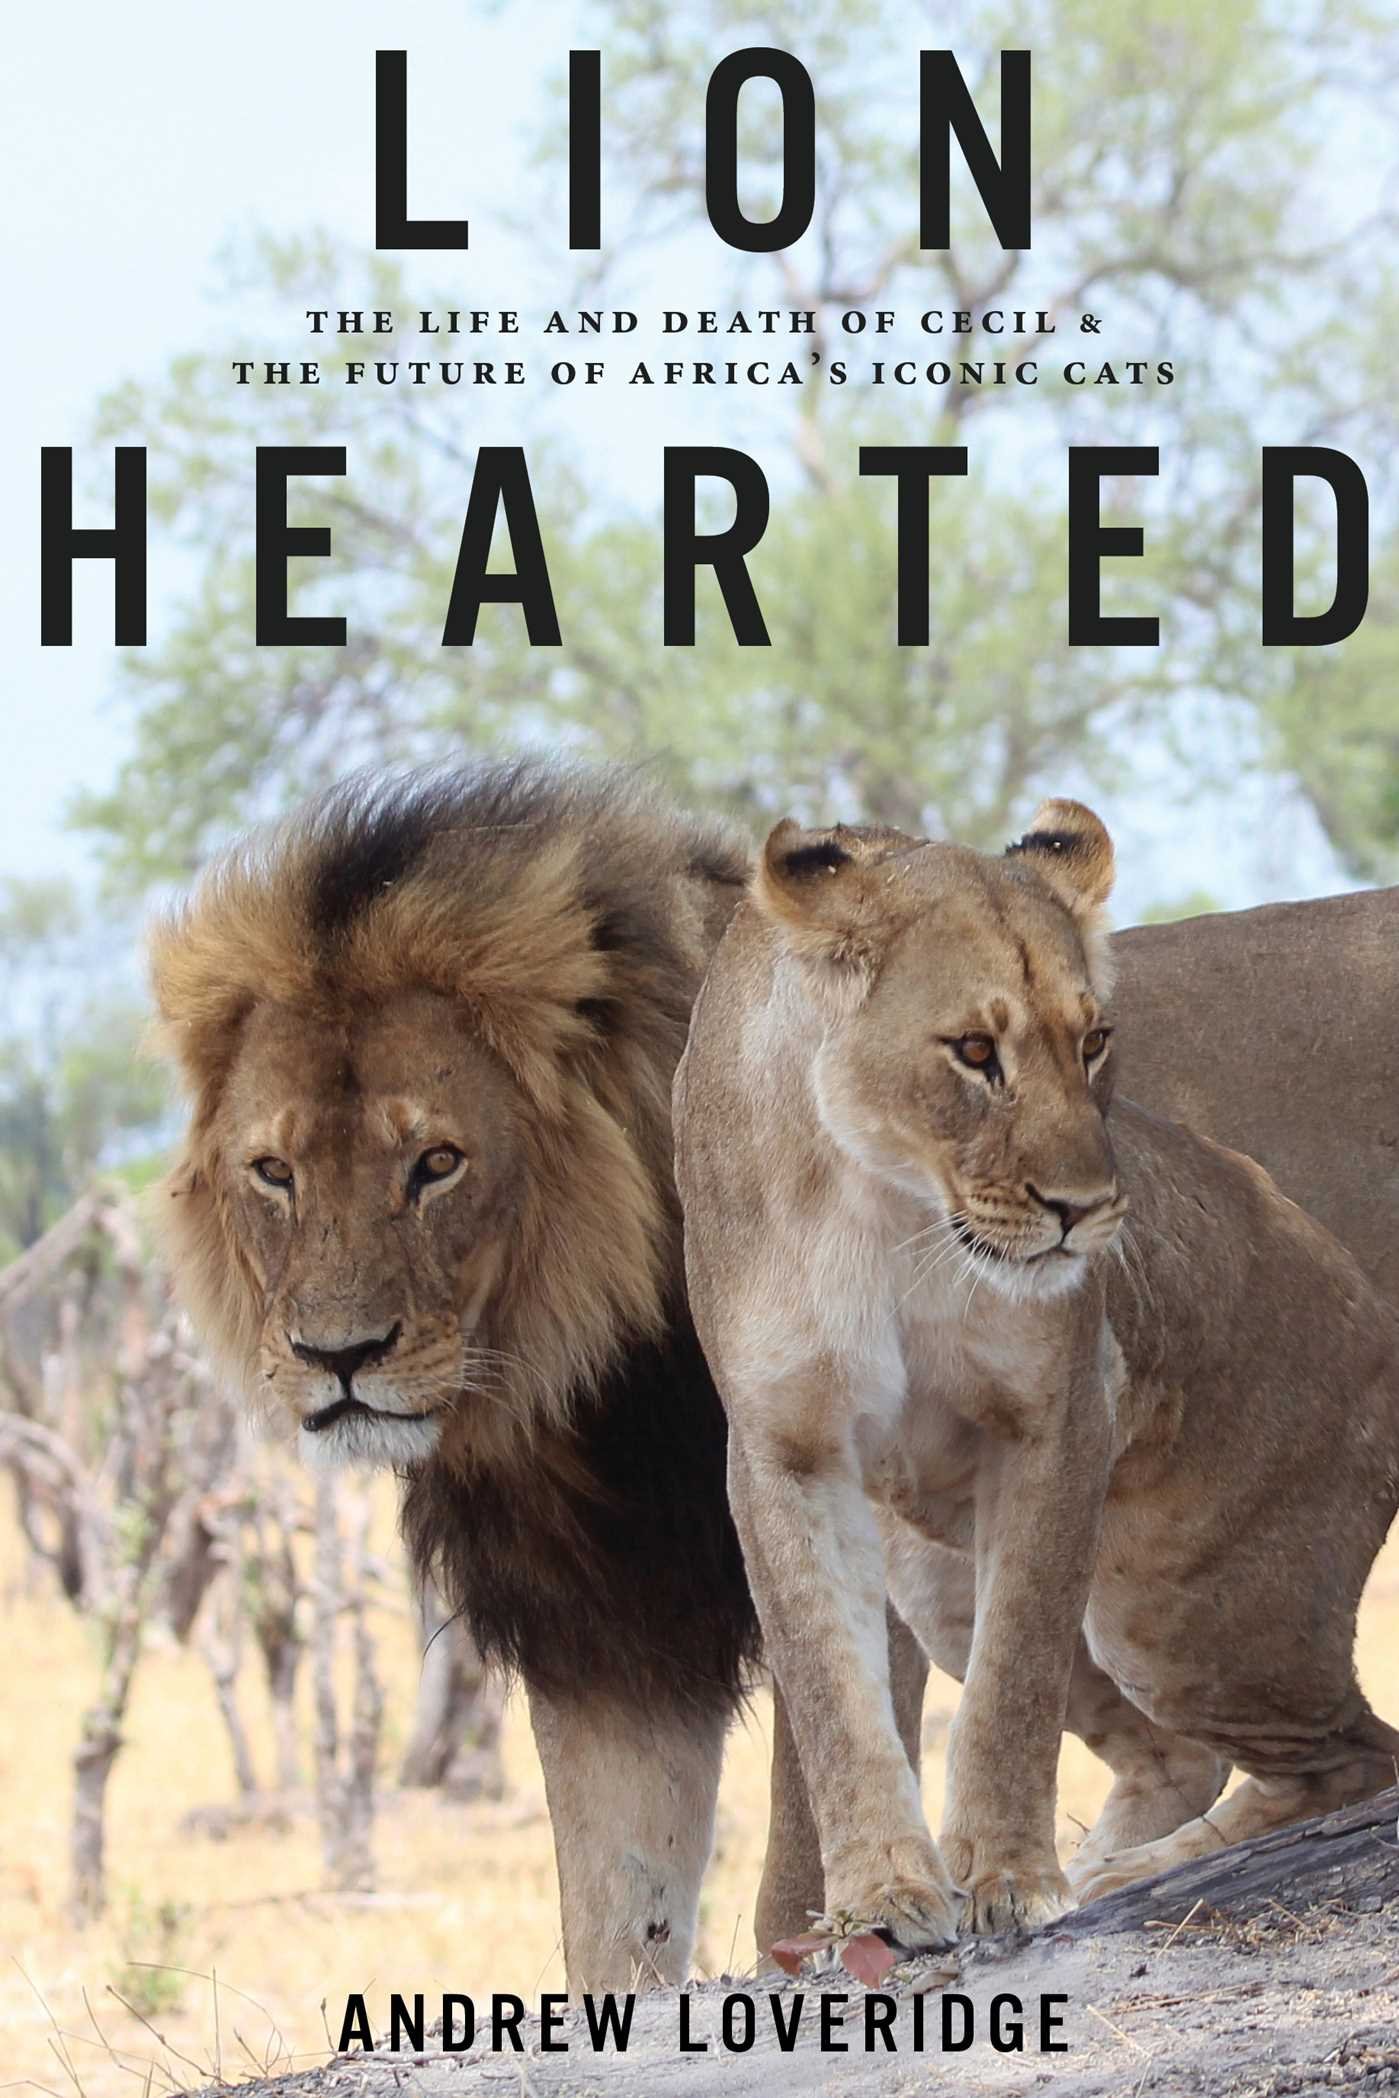 Lion Hearted: The Life and Death of Cecil and the Future of Africa's Iconic Cats